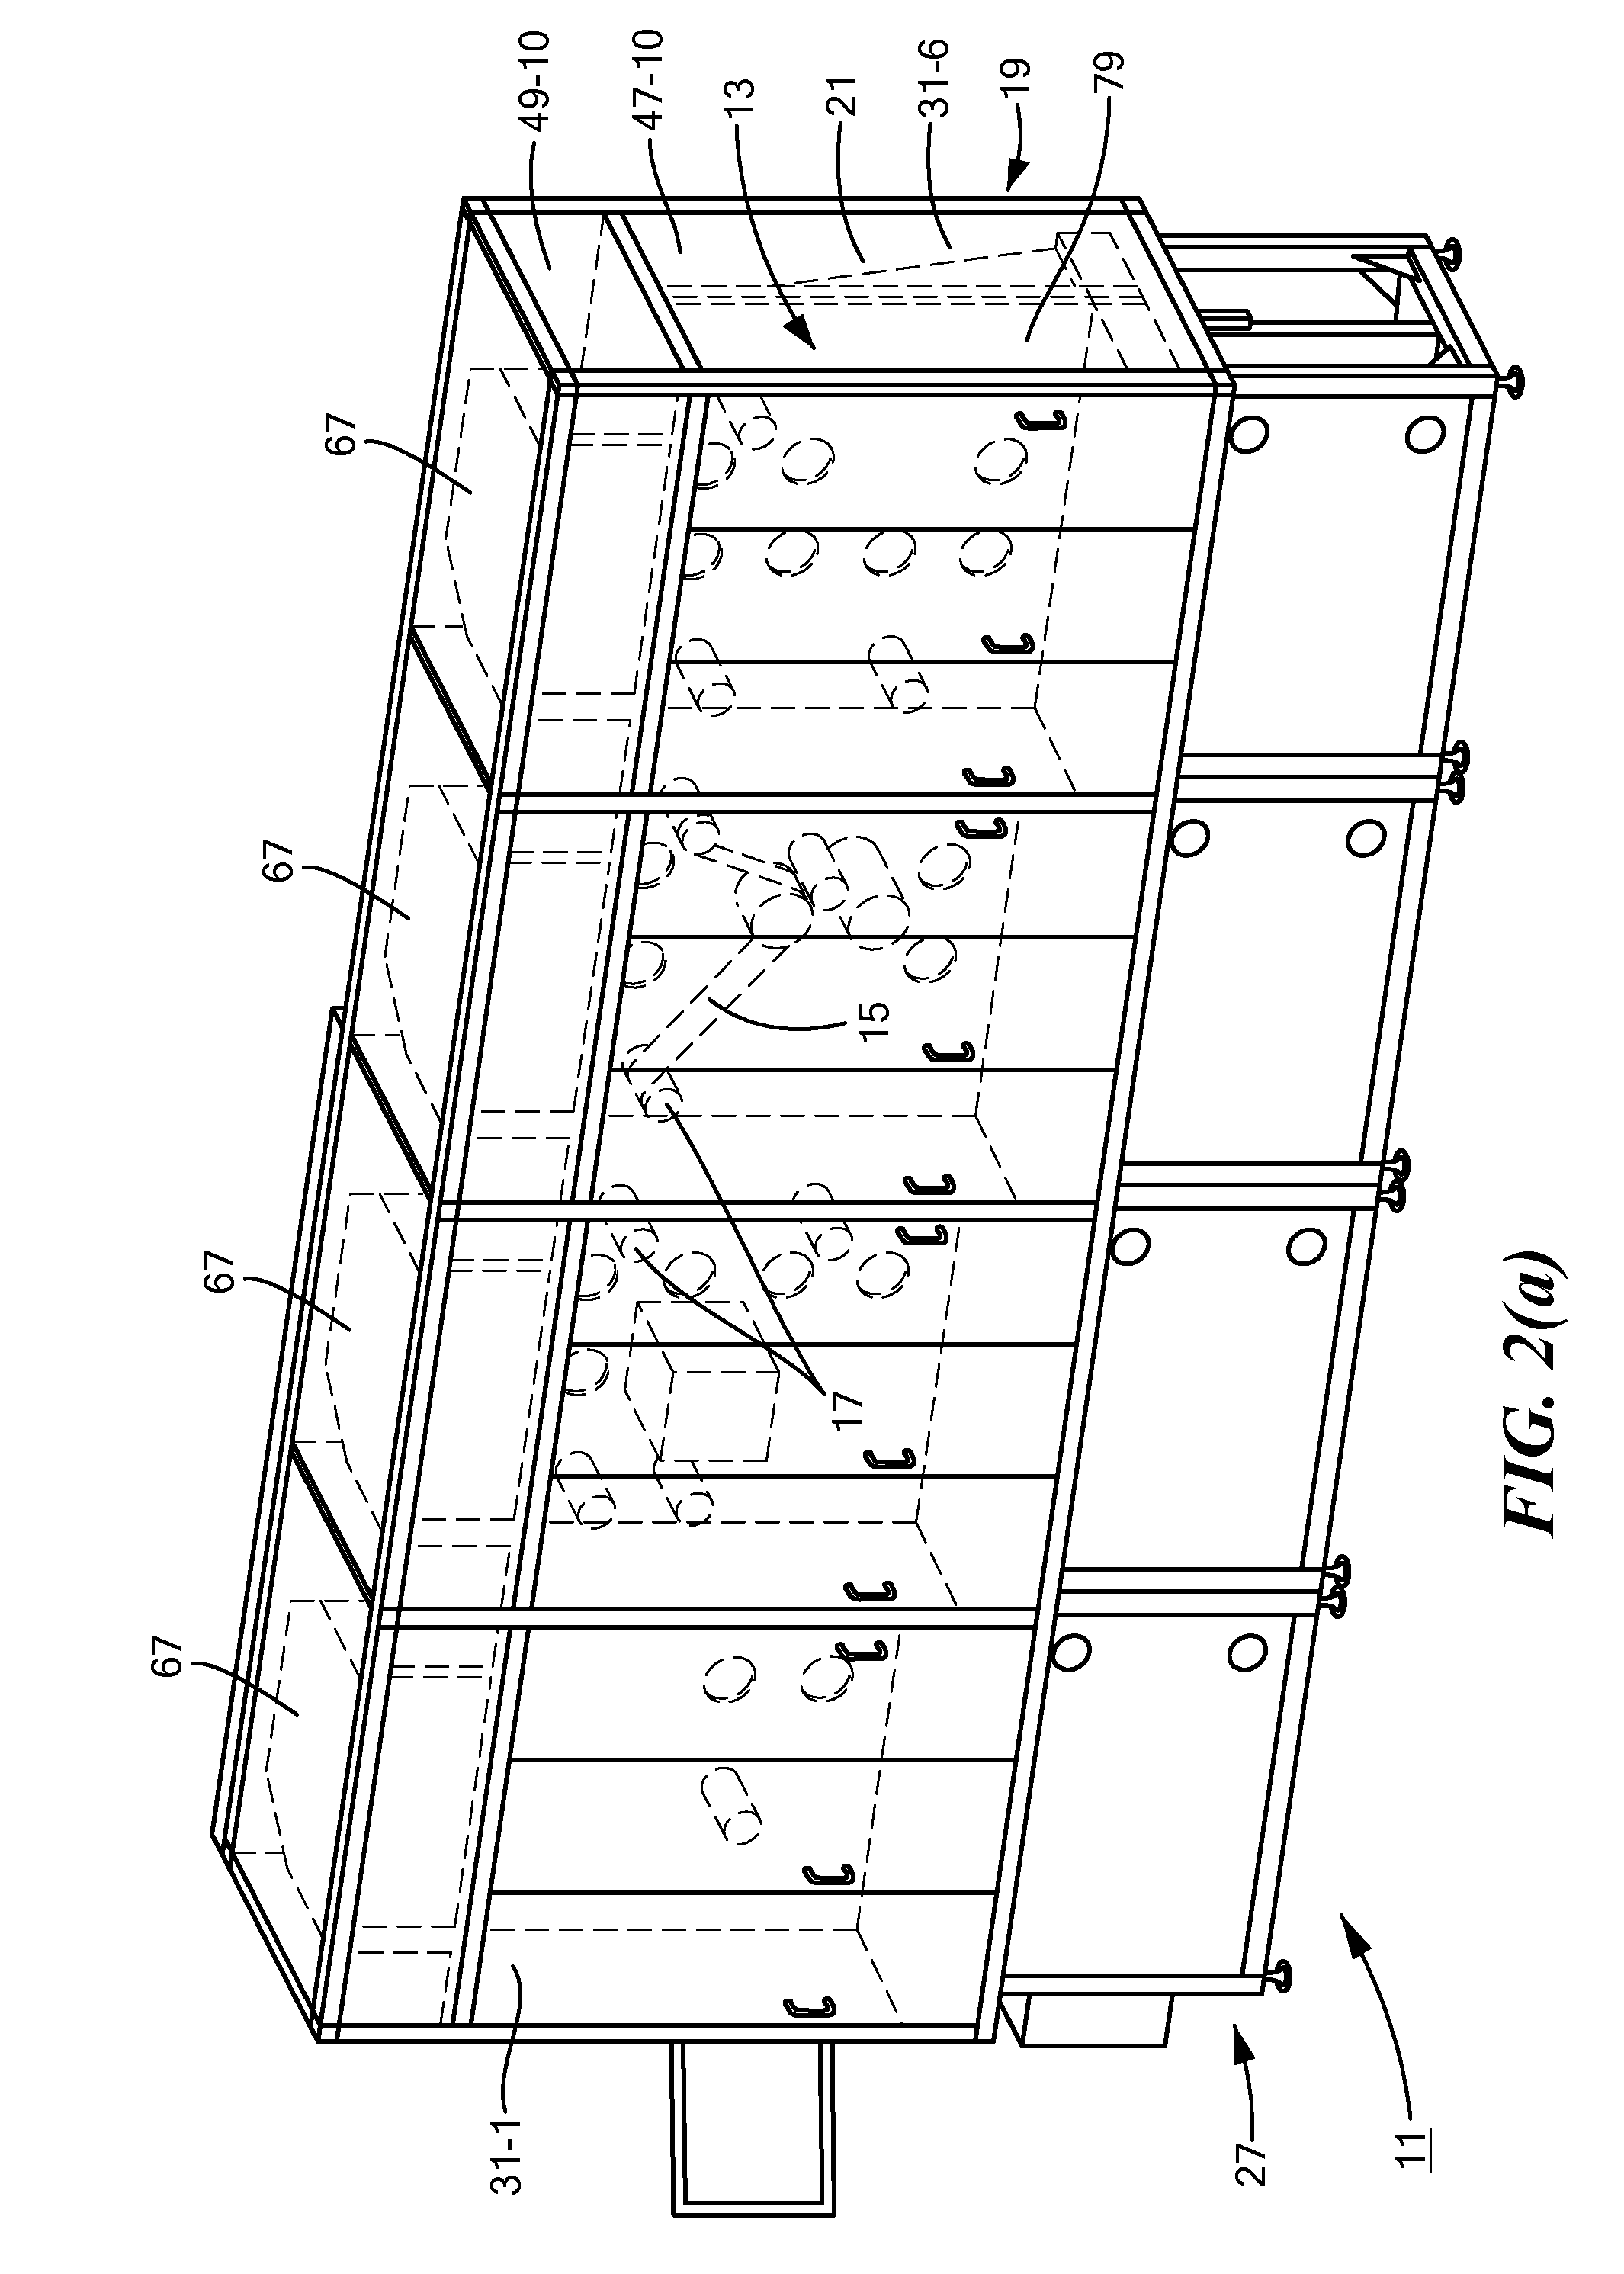 System for maintaining a pollutant controlled workspace